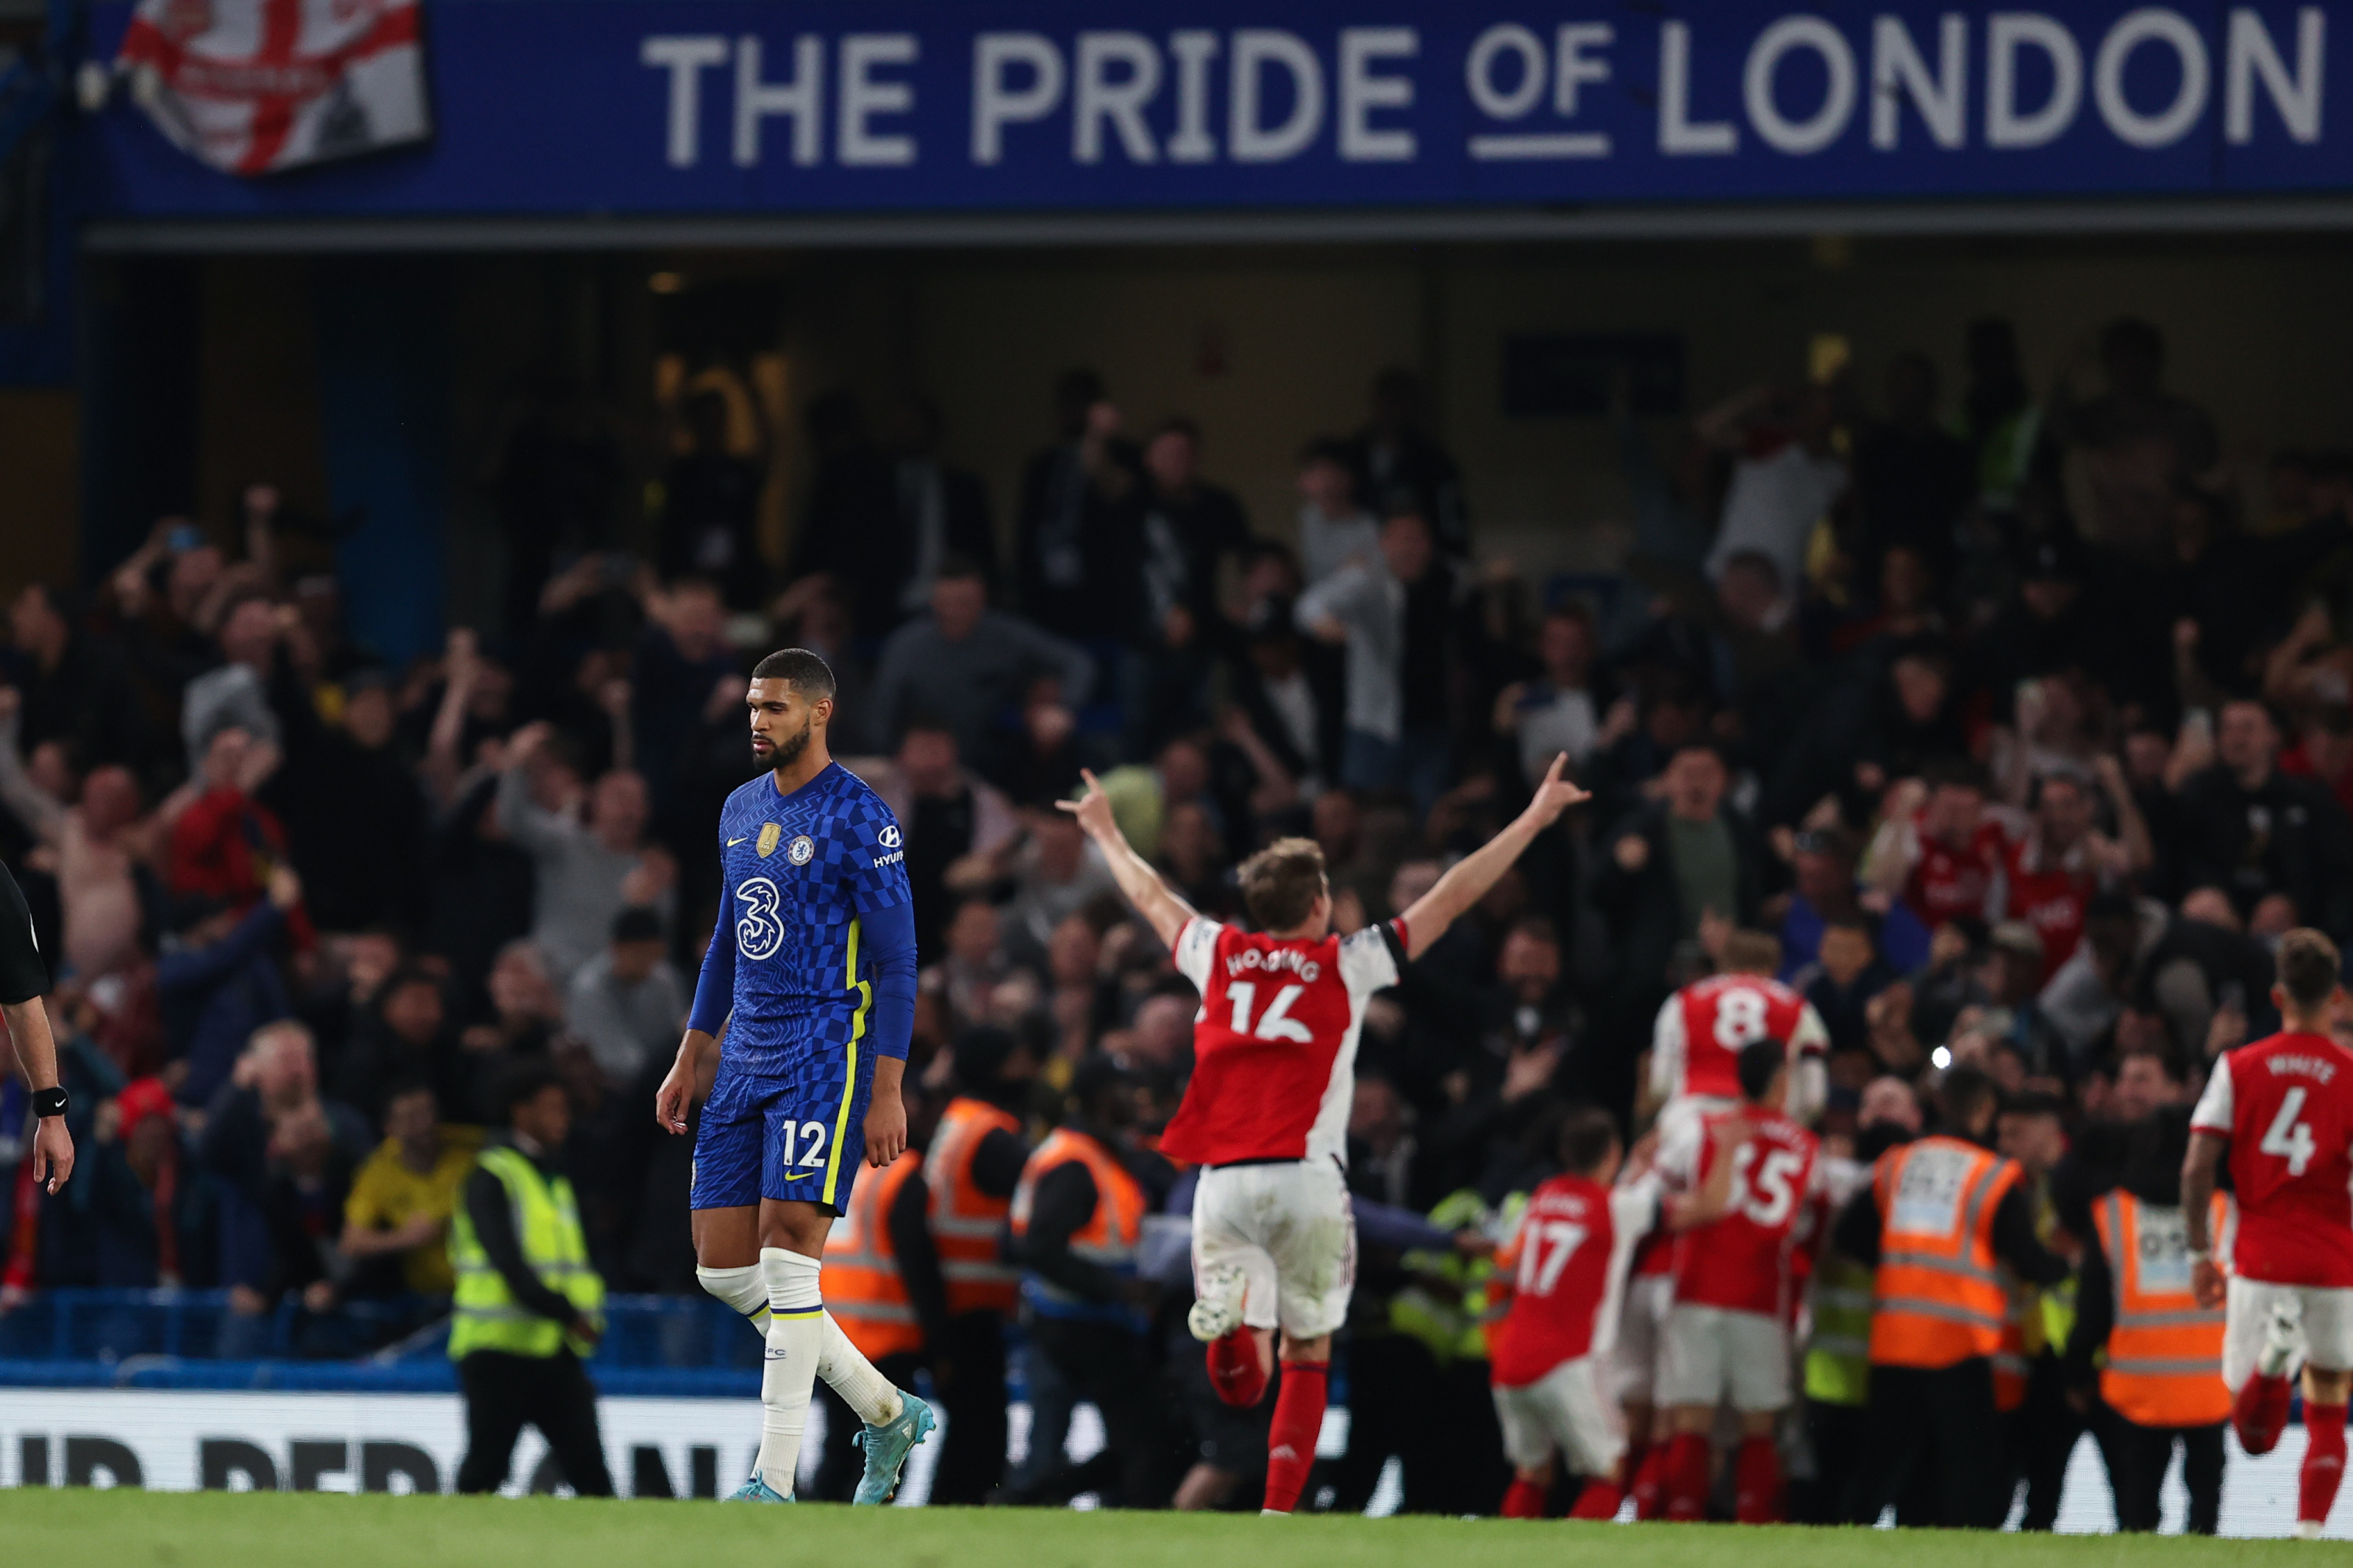 Chelsea vs Arsenal Preview How to Watch, Team News and Prediction